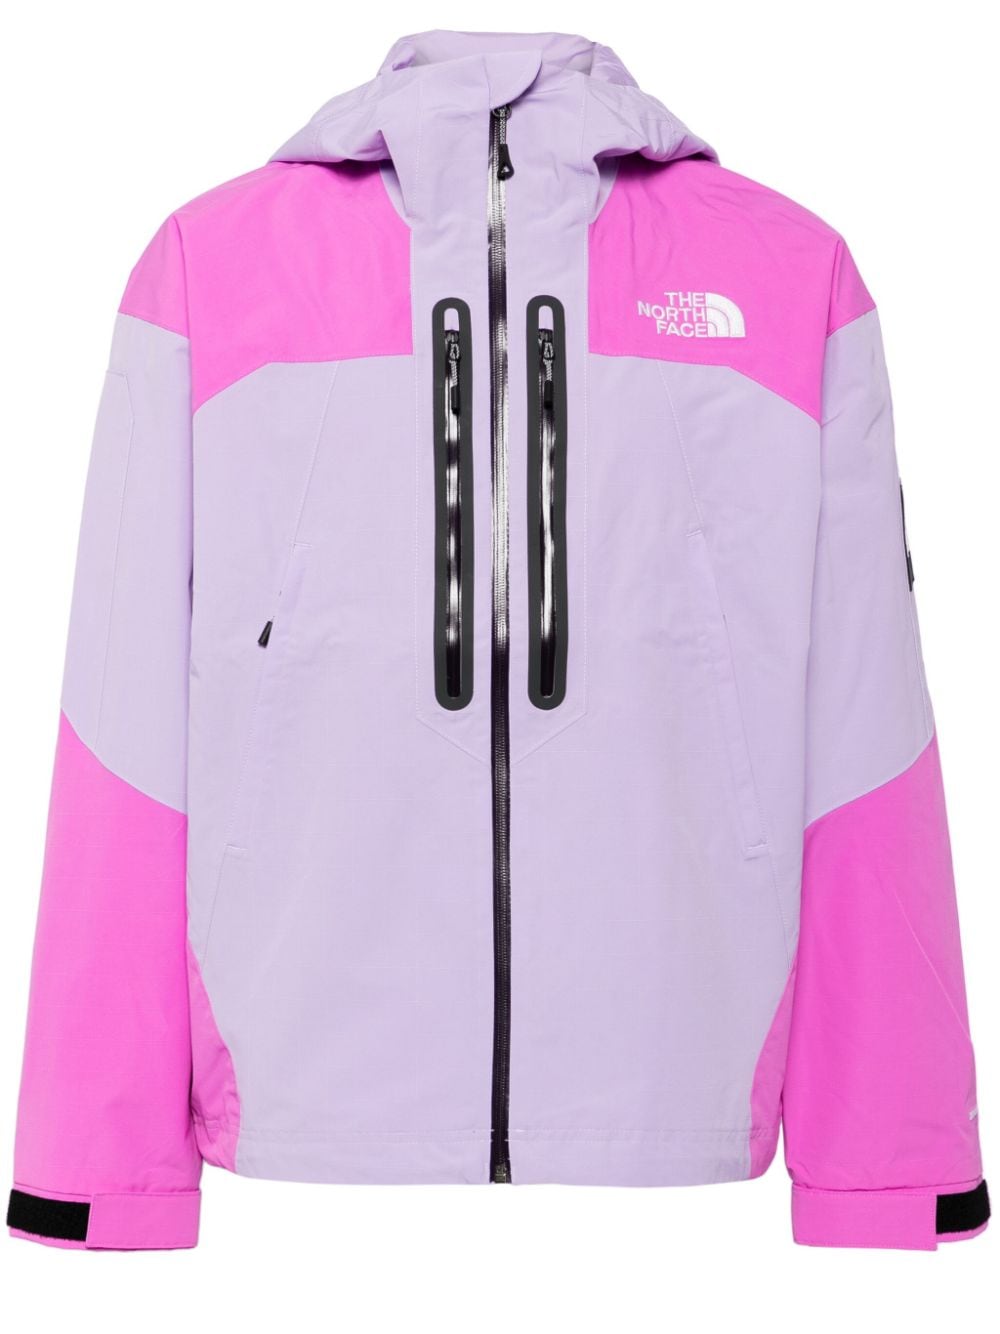 The North Face Transverse 2L DryVent™ hooded jacket - Viola